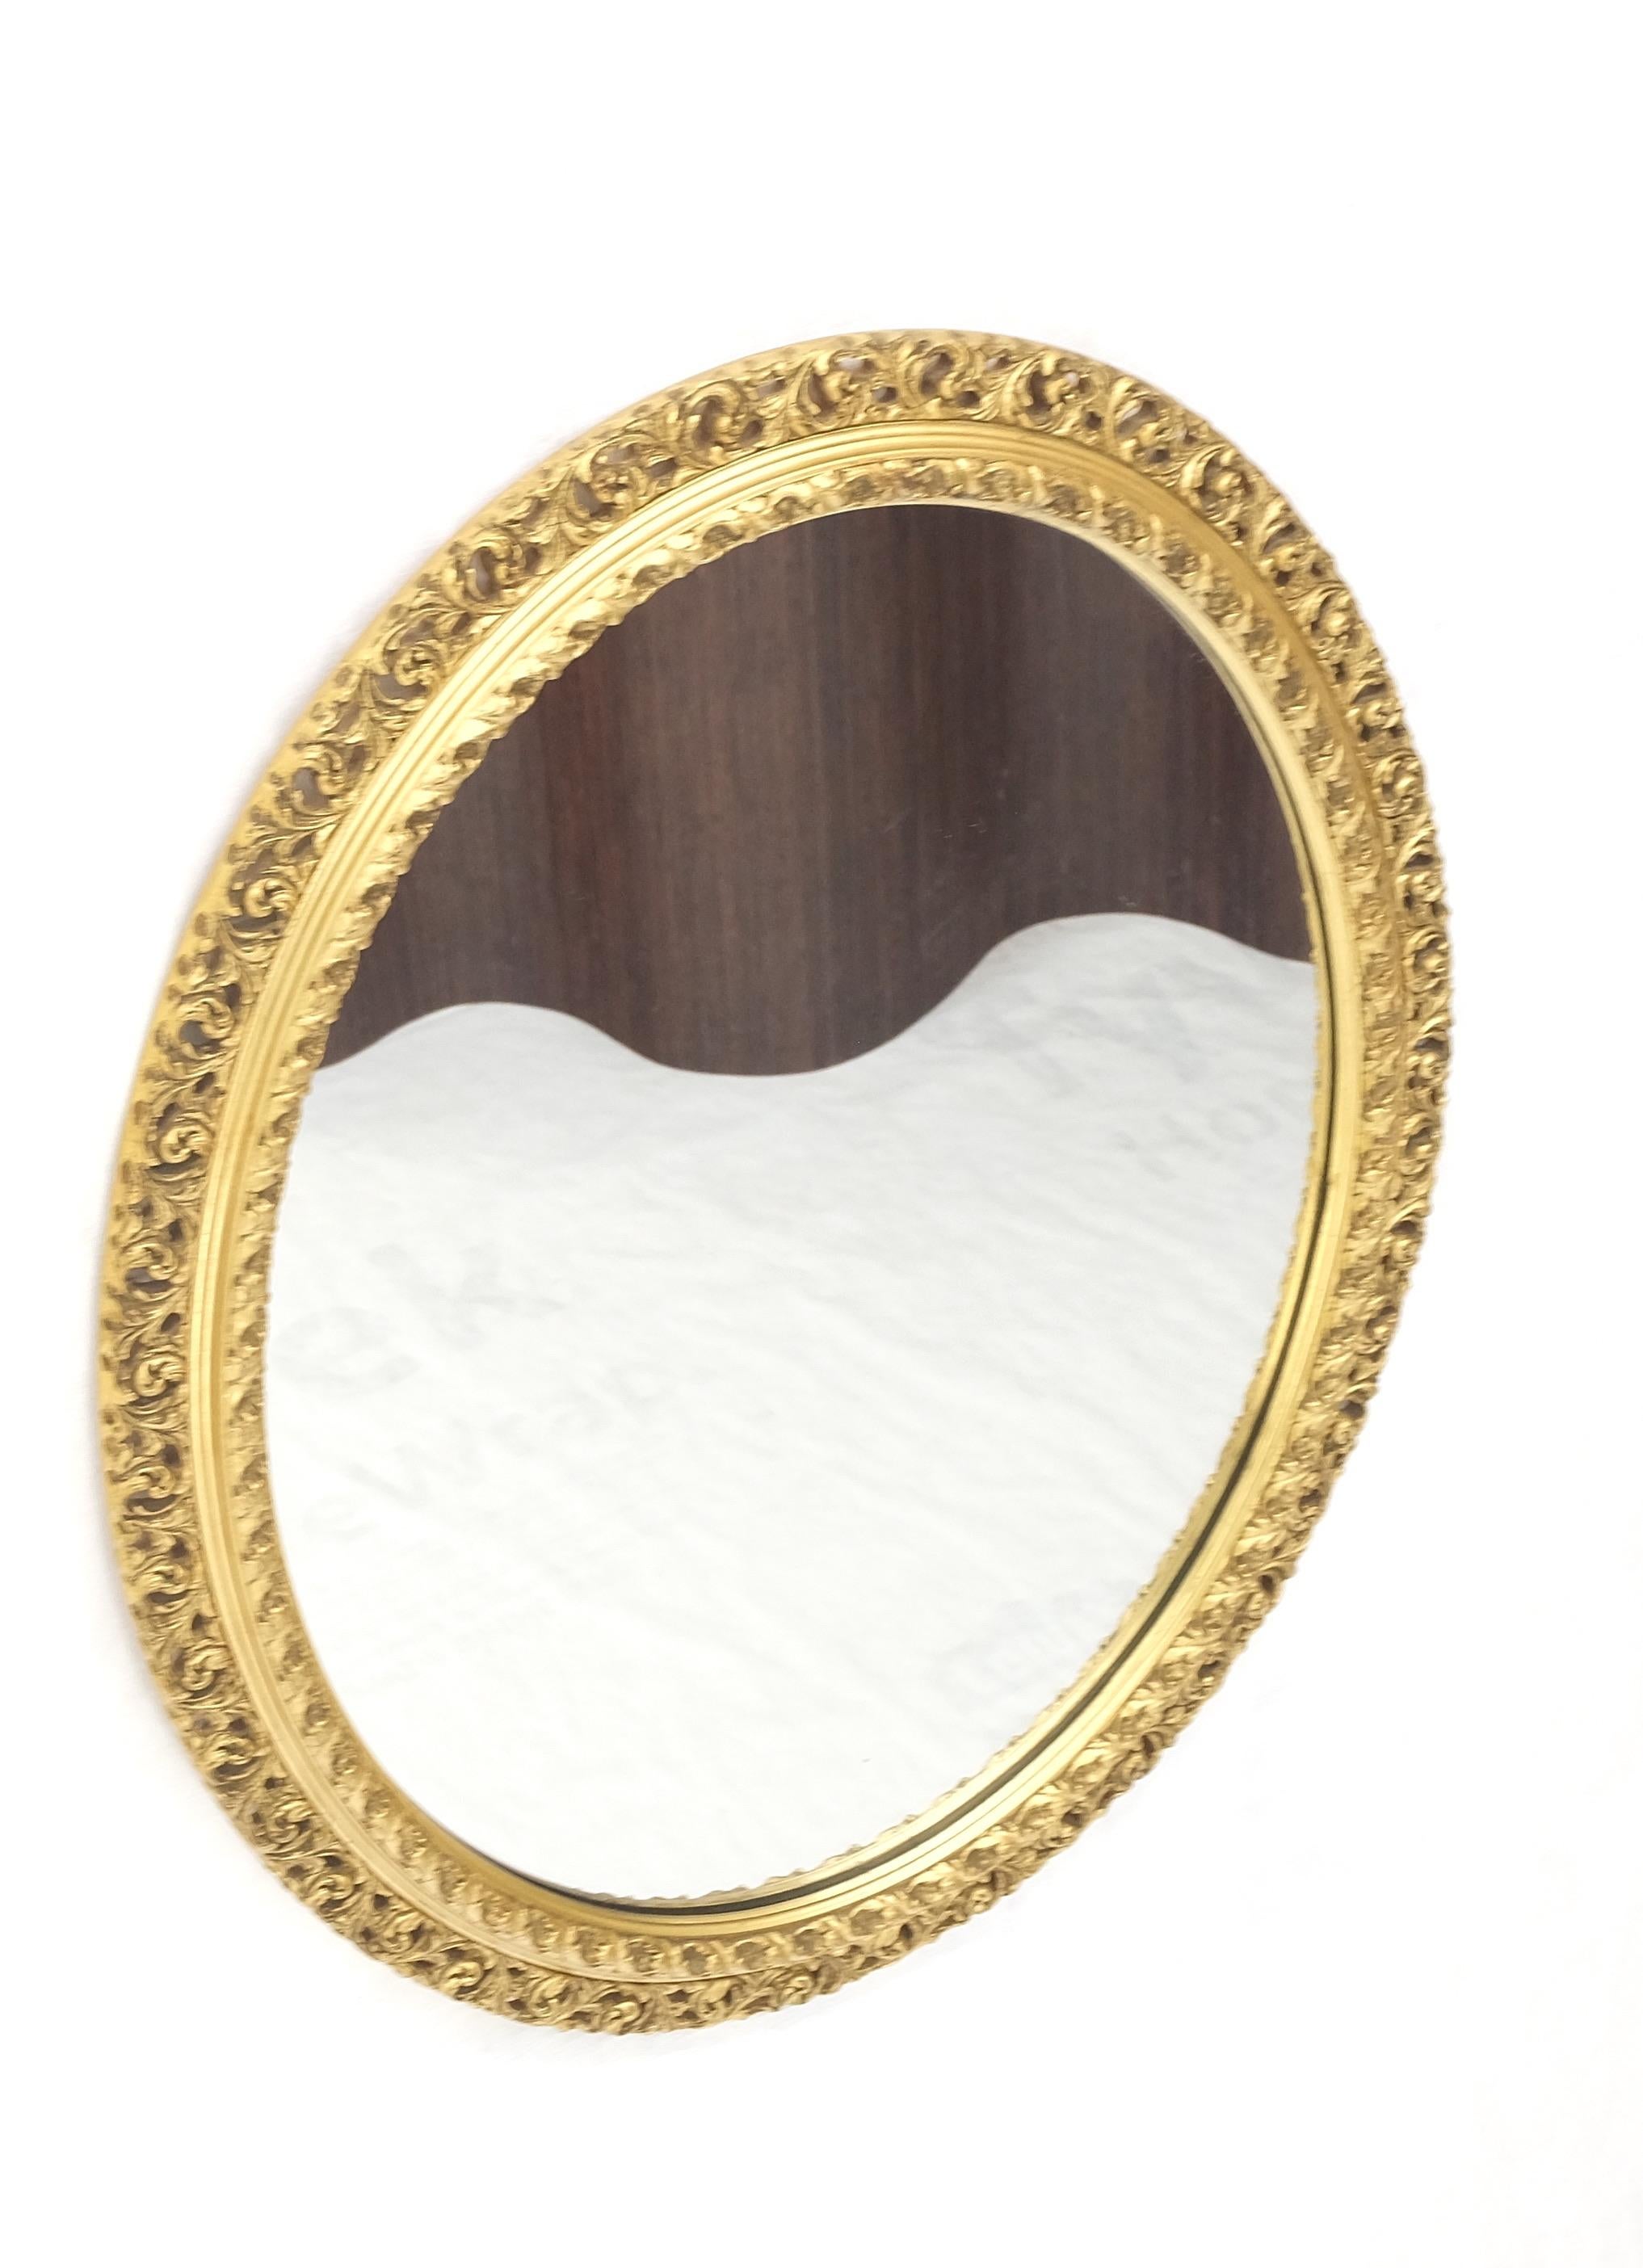 American Oval Gesso & Carved Wood Gold Gilt Frame Wall Mirror Mint! For Sale